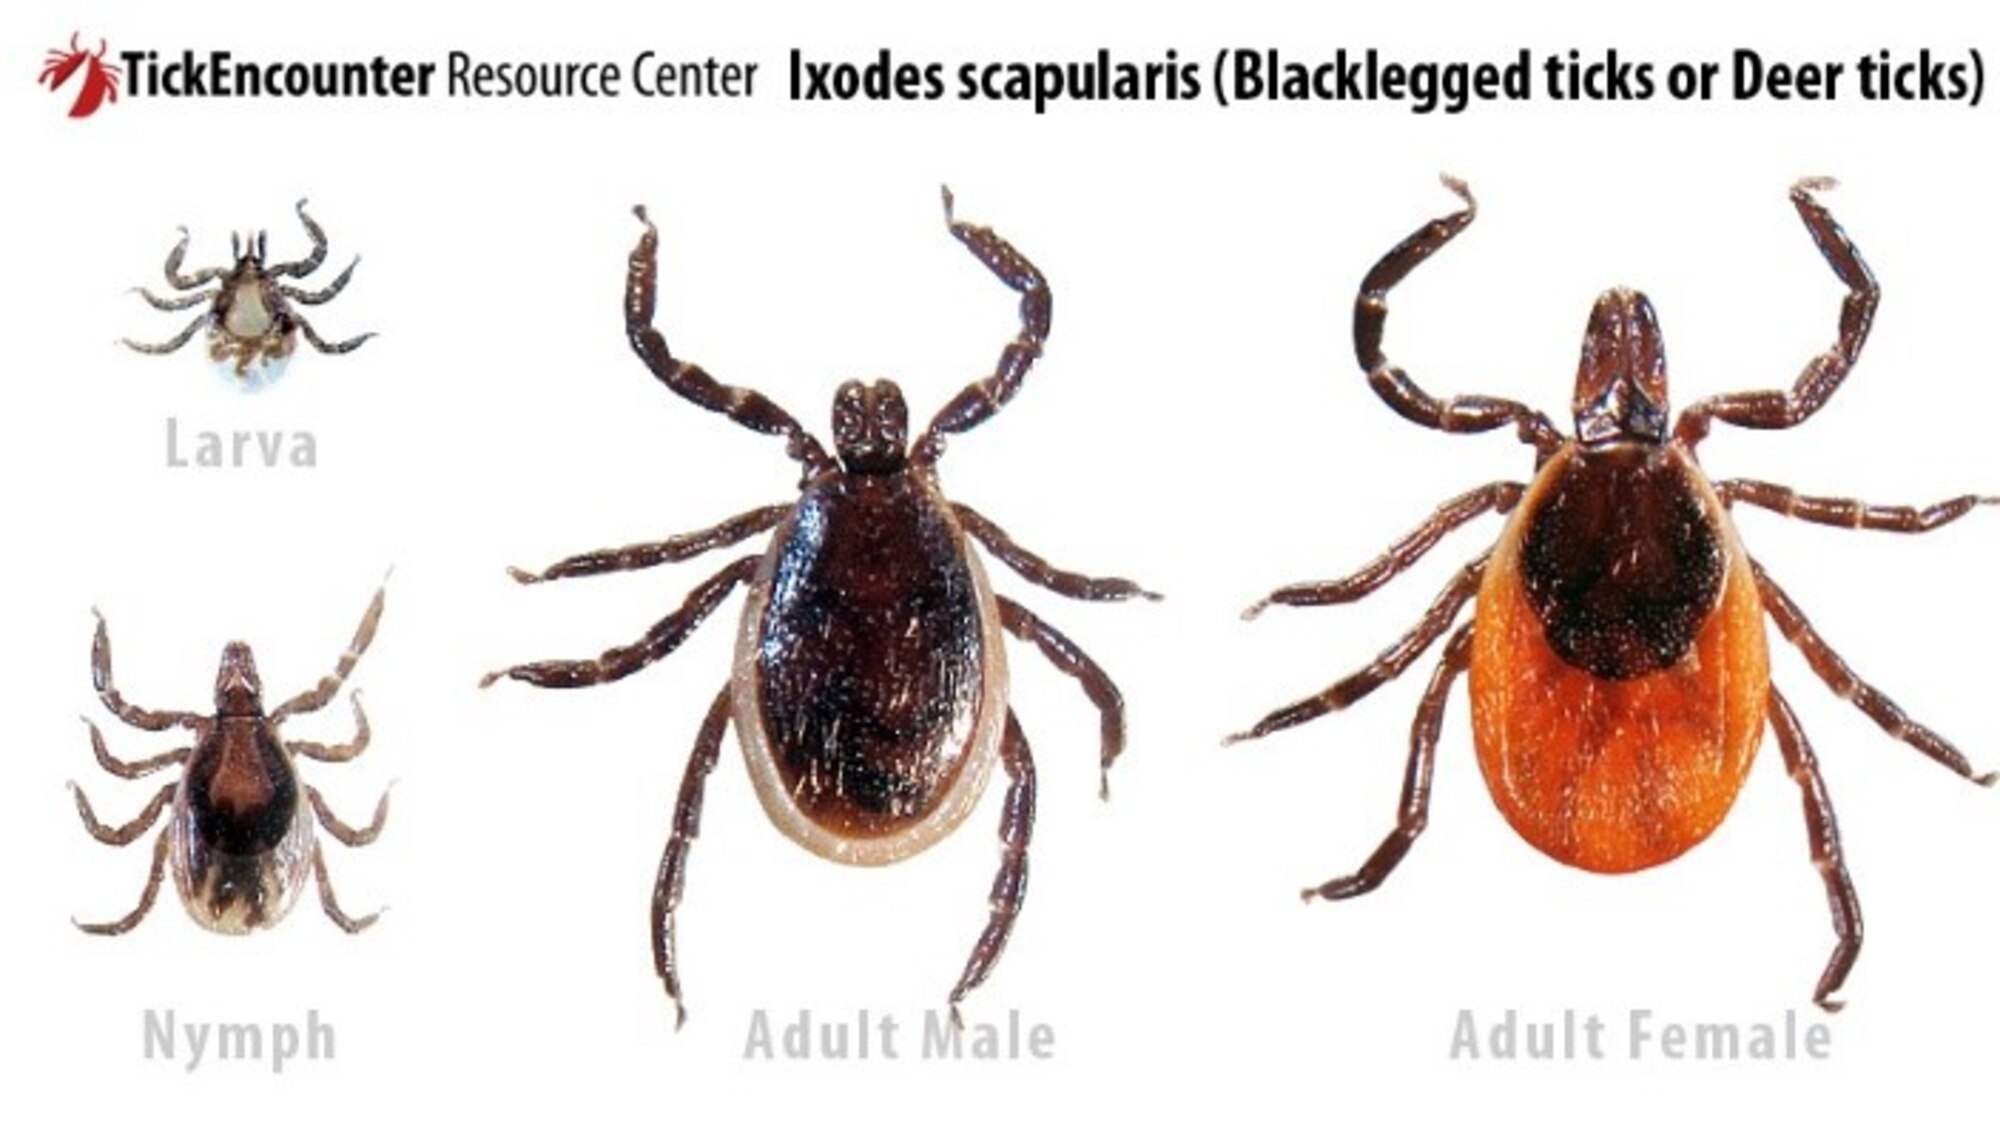 Tick ID courtesy of the University of Rhode Island's TickEncounter Resource Center.